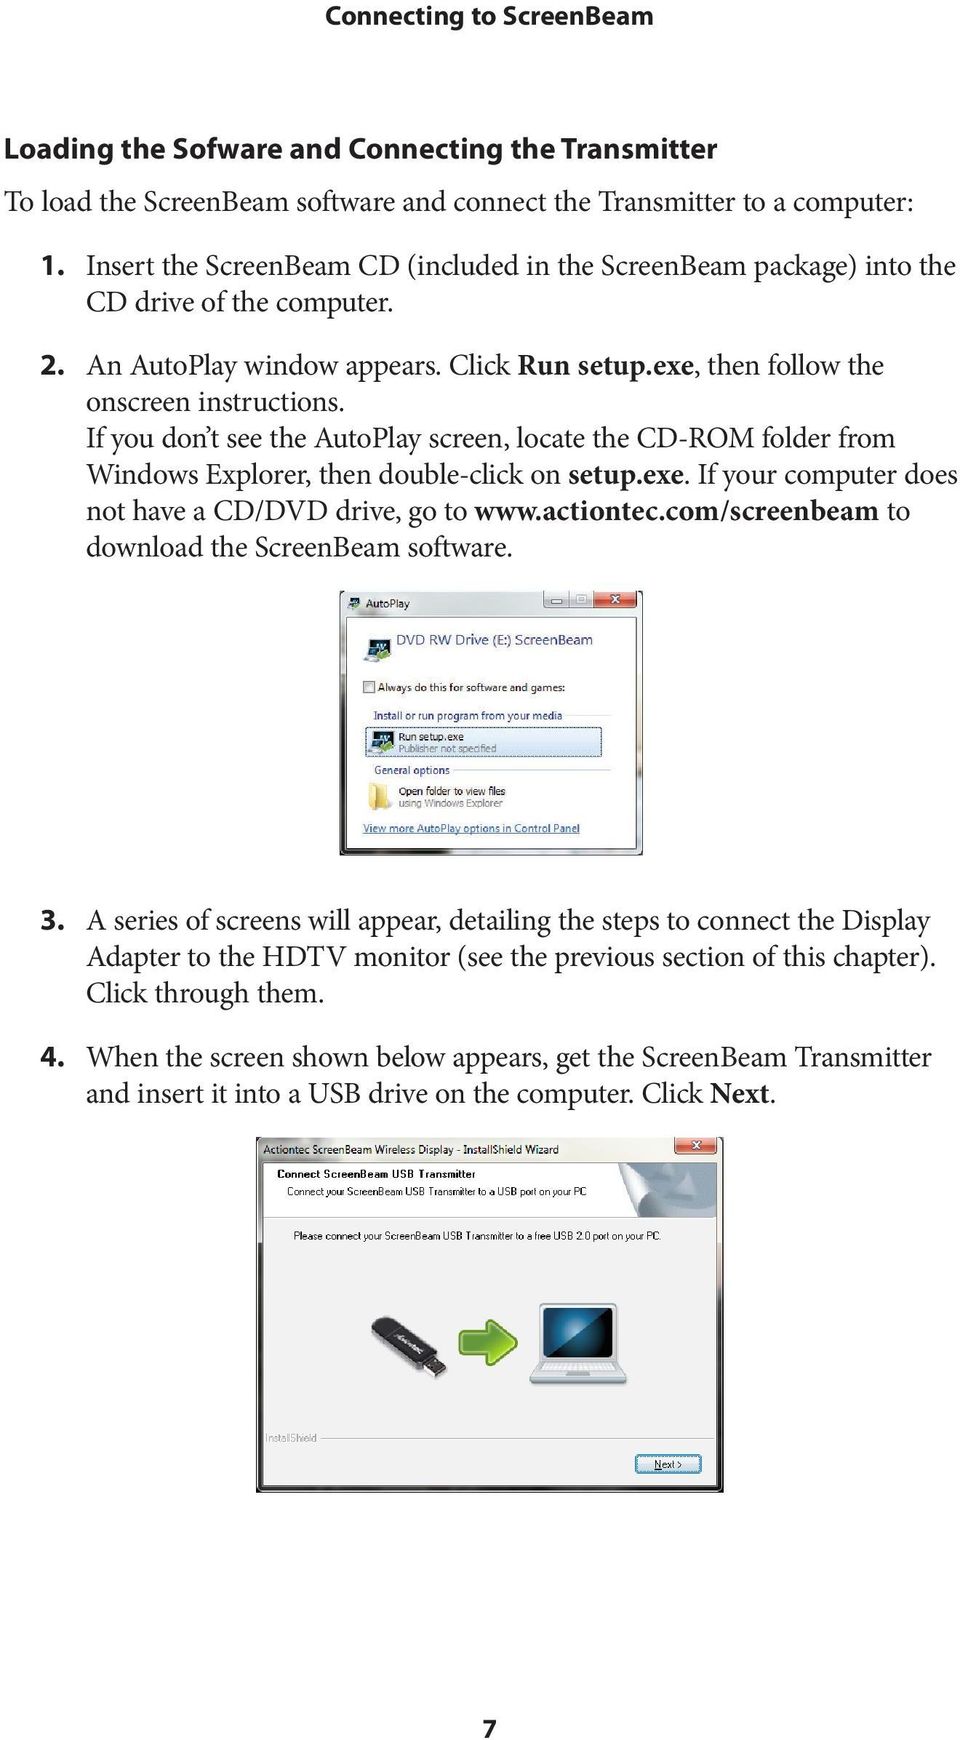 If you don t see the AutoPlay screen, locate the CD-ROM folder from Windows Explorer, then double-click on setup.exe. If your computer does not have a CD/DVD drive, go to www.actiontec.